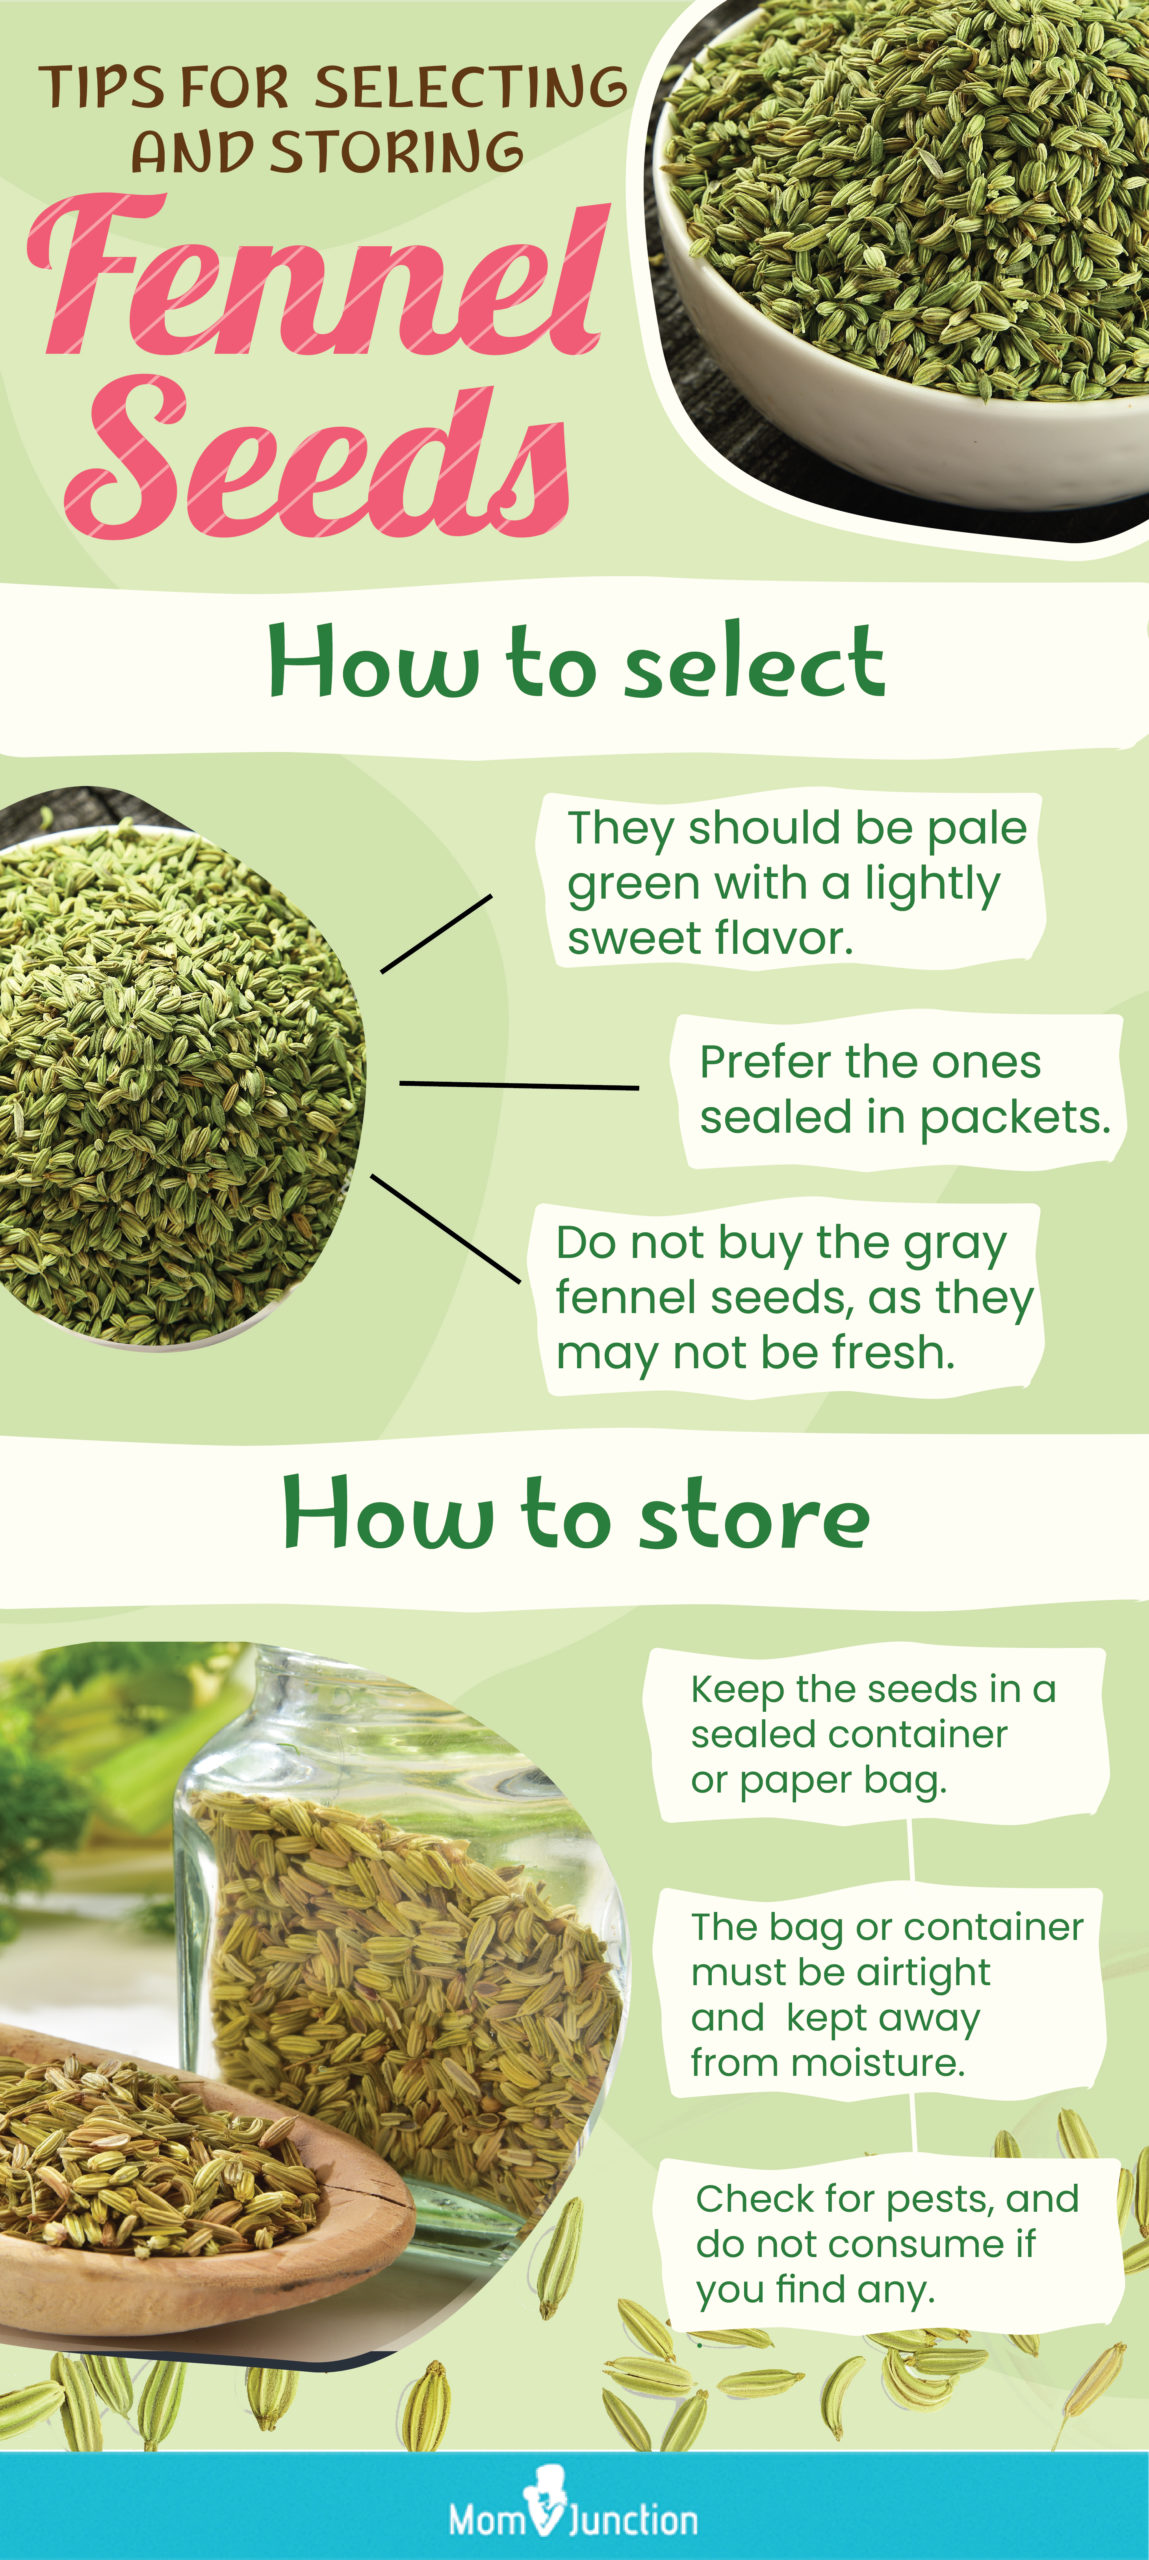 tips for selecting and storing fennel seeds (infographic)